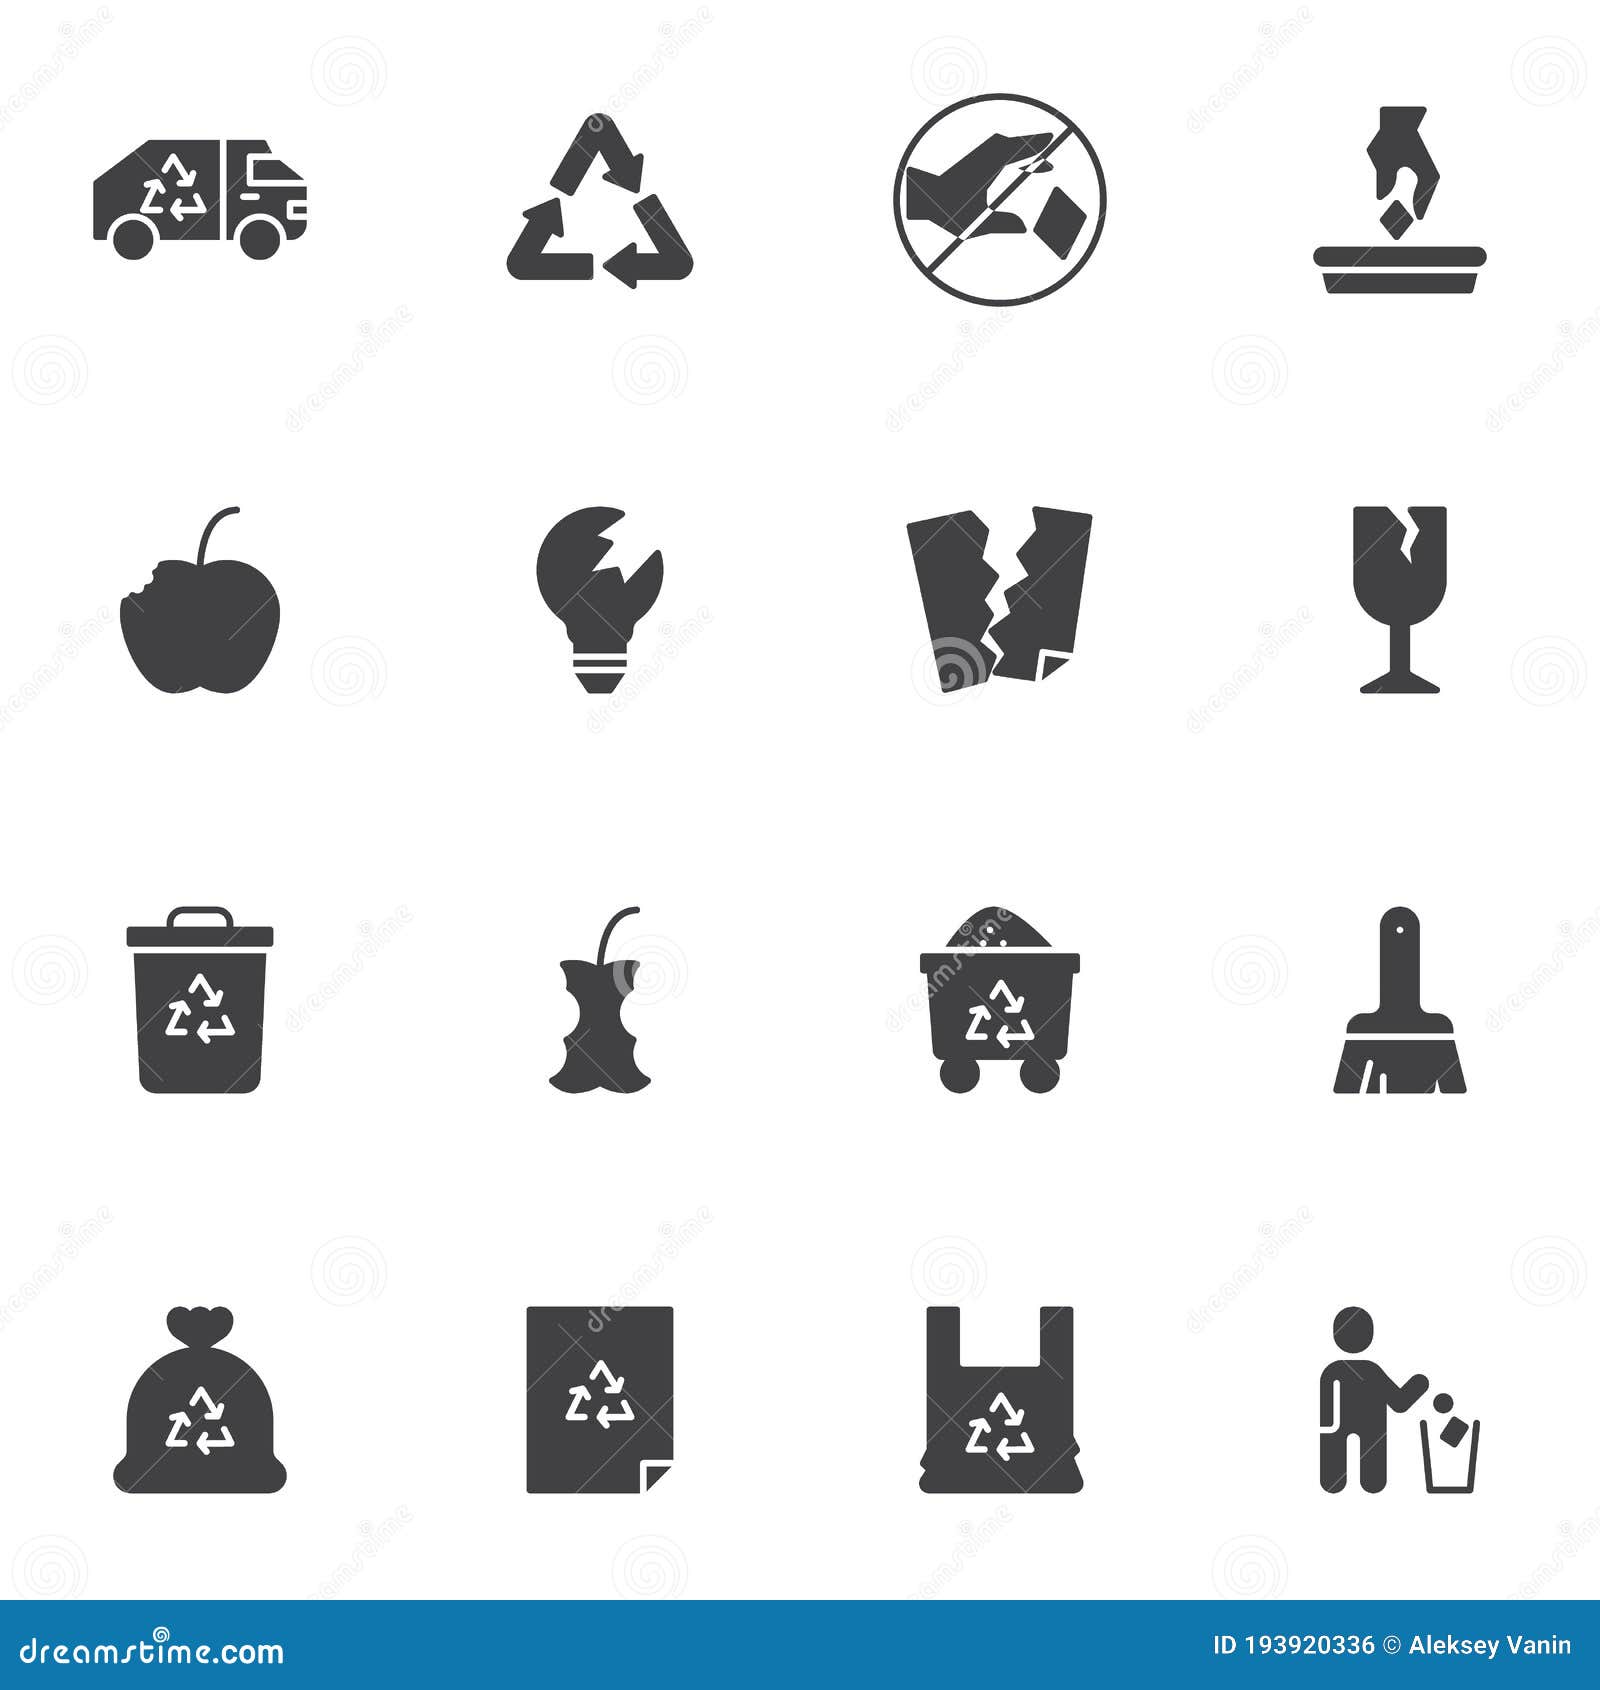 waste material  icons set